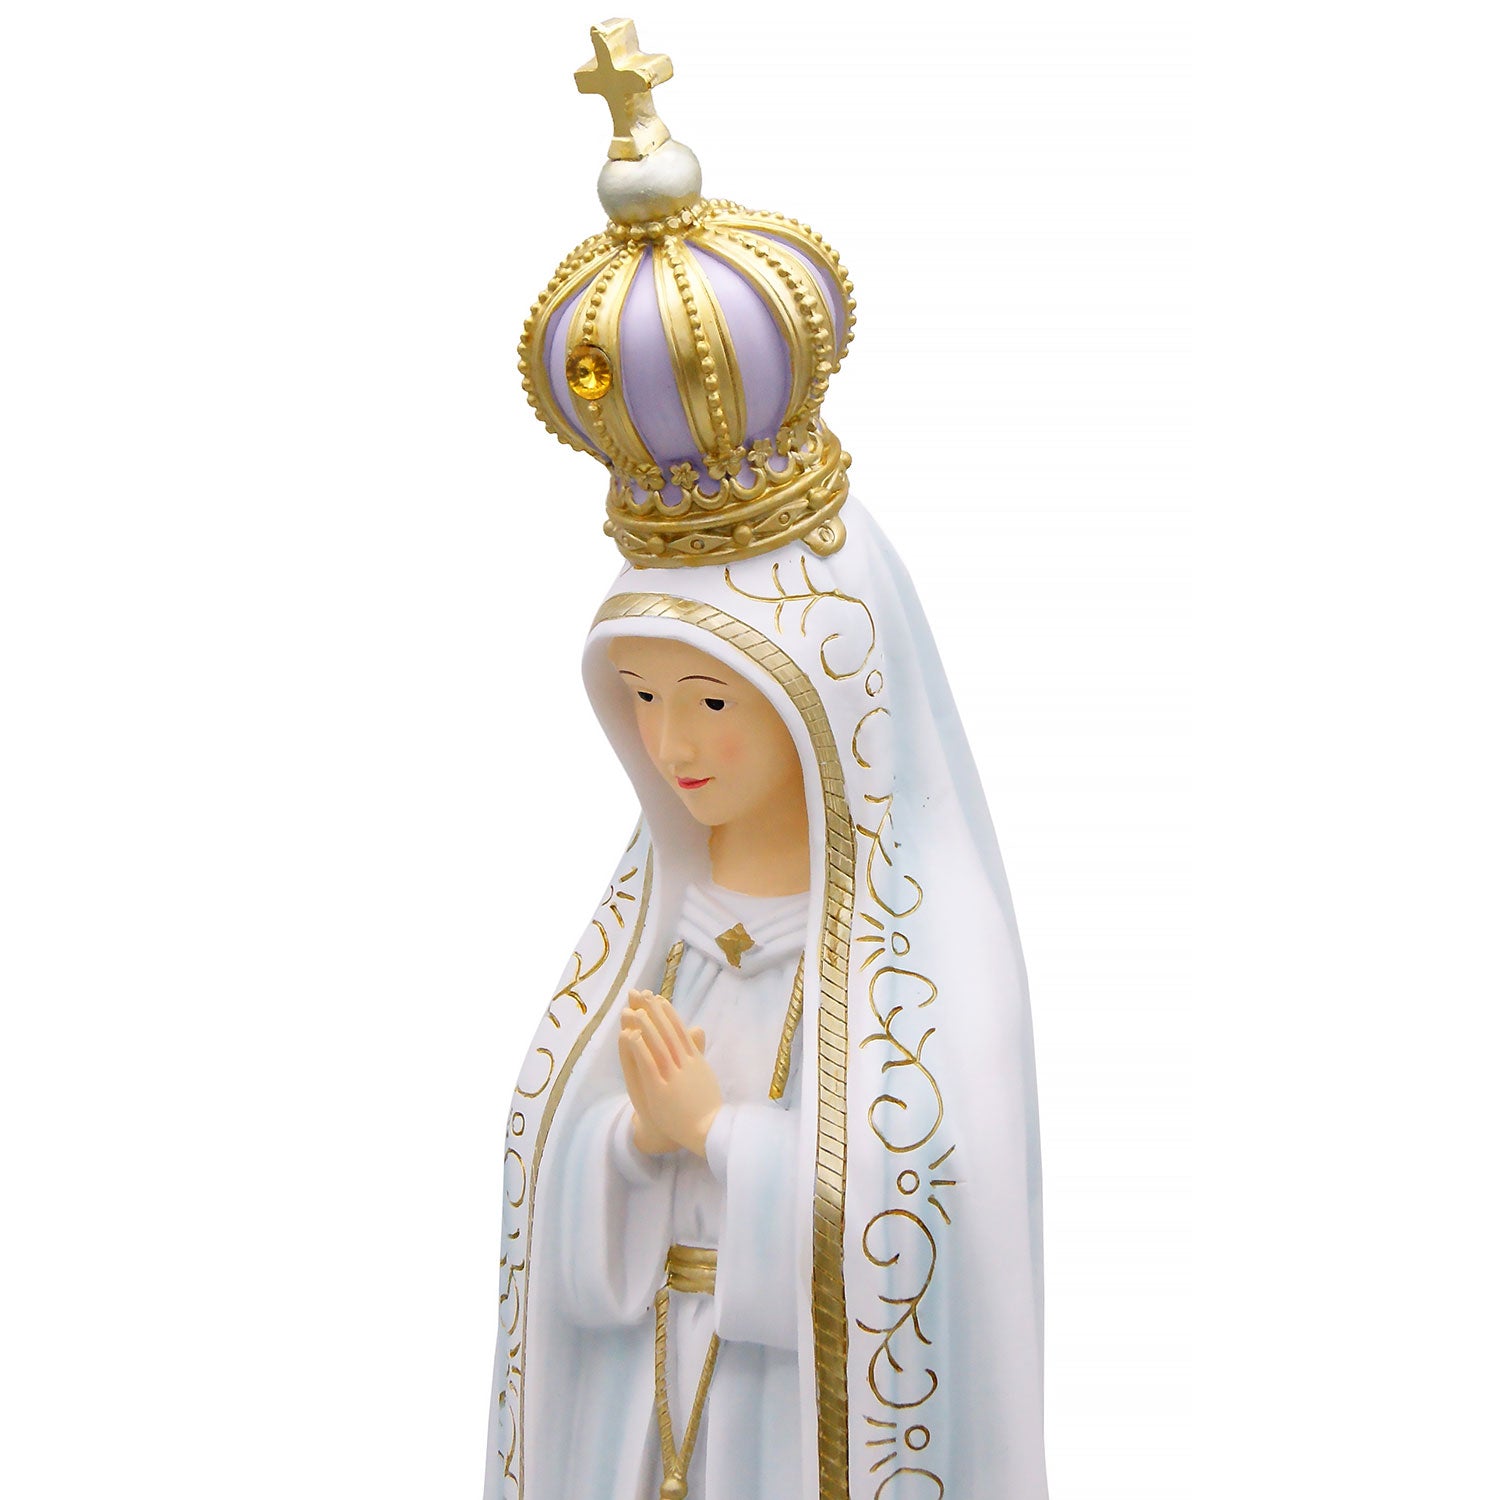 Our Lady of Fatima statue sits on a cloud and has an ornate crown. 